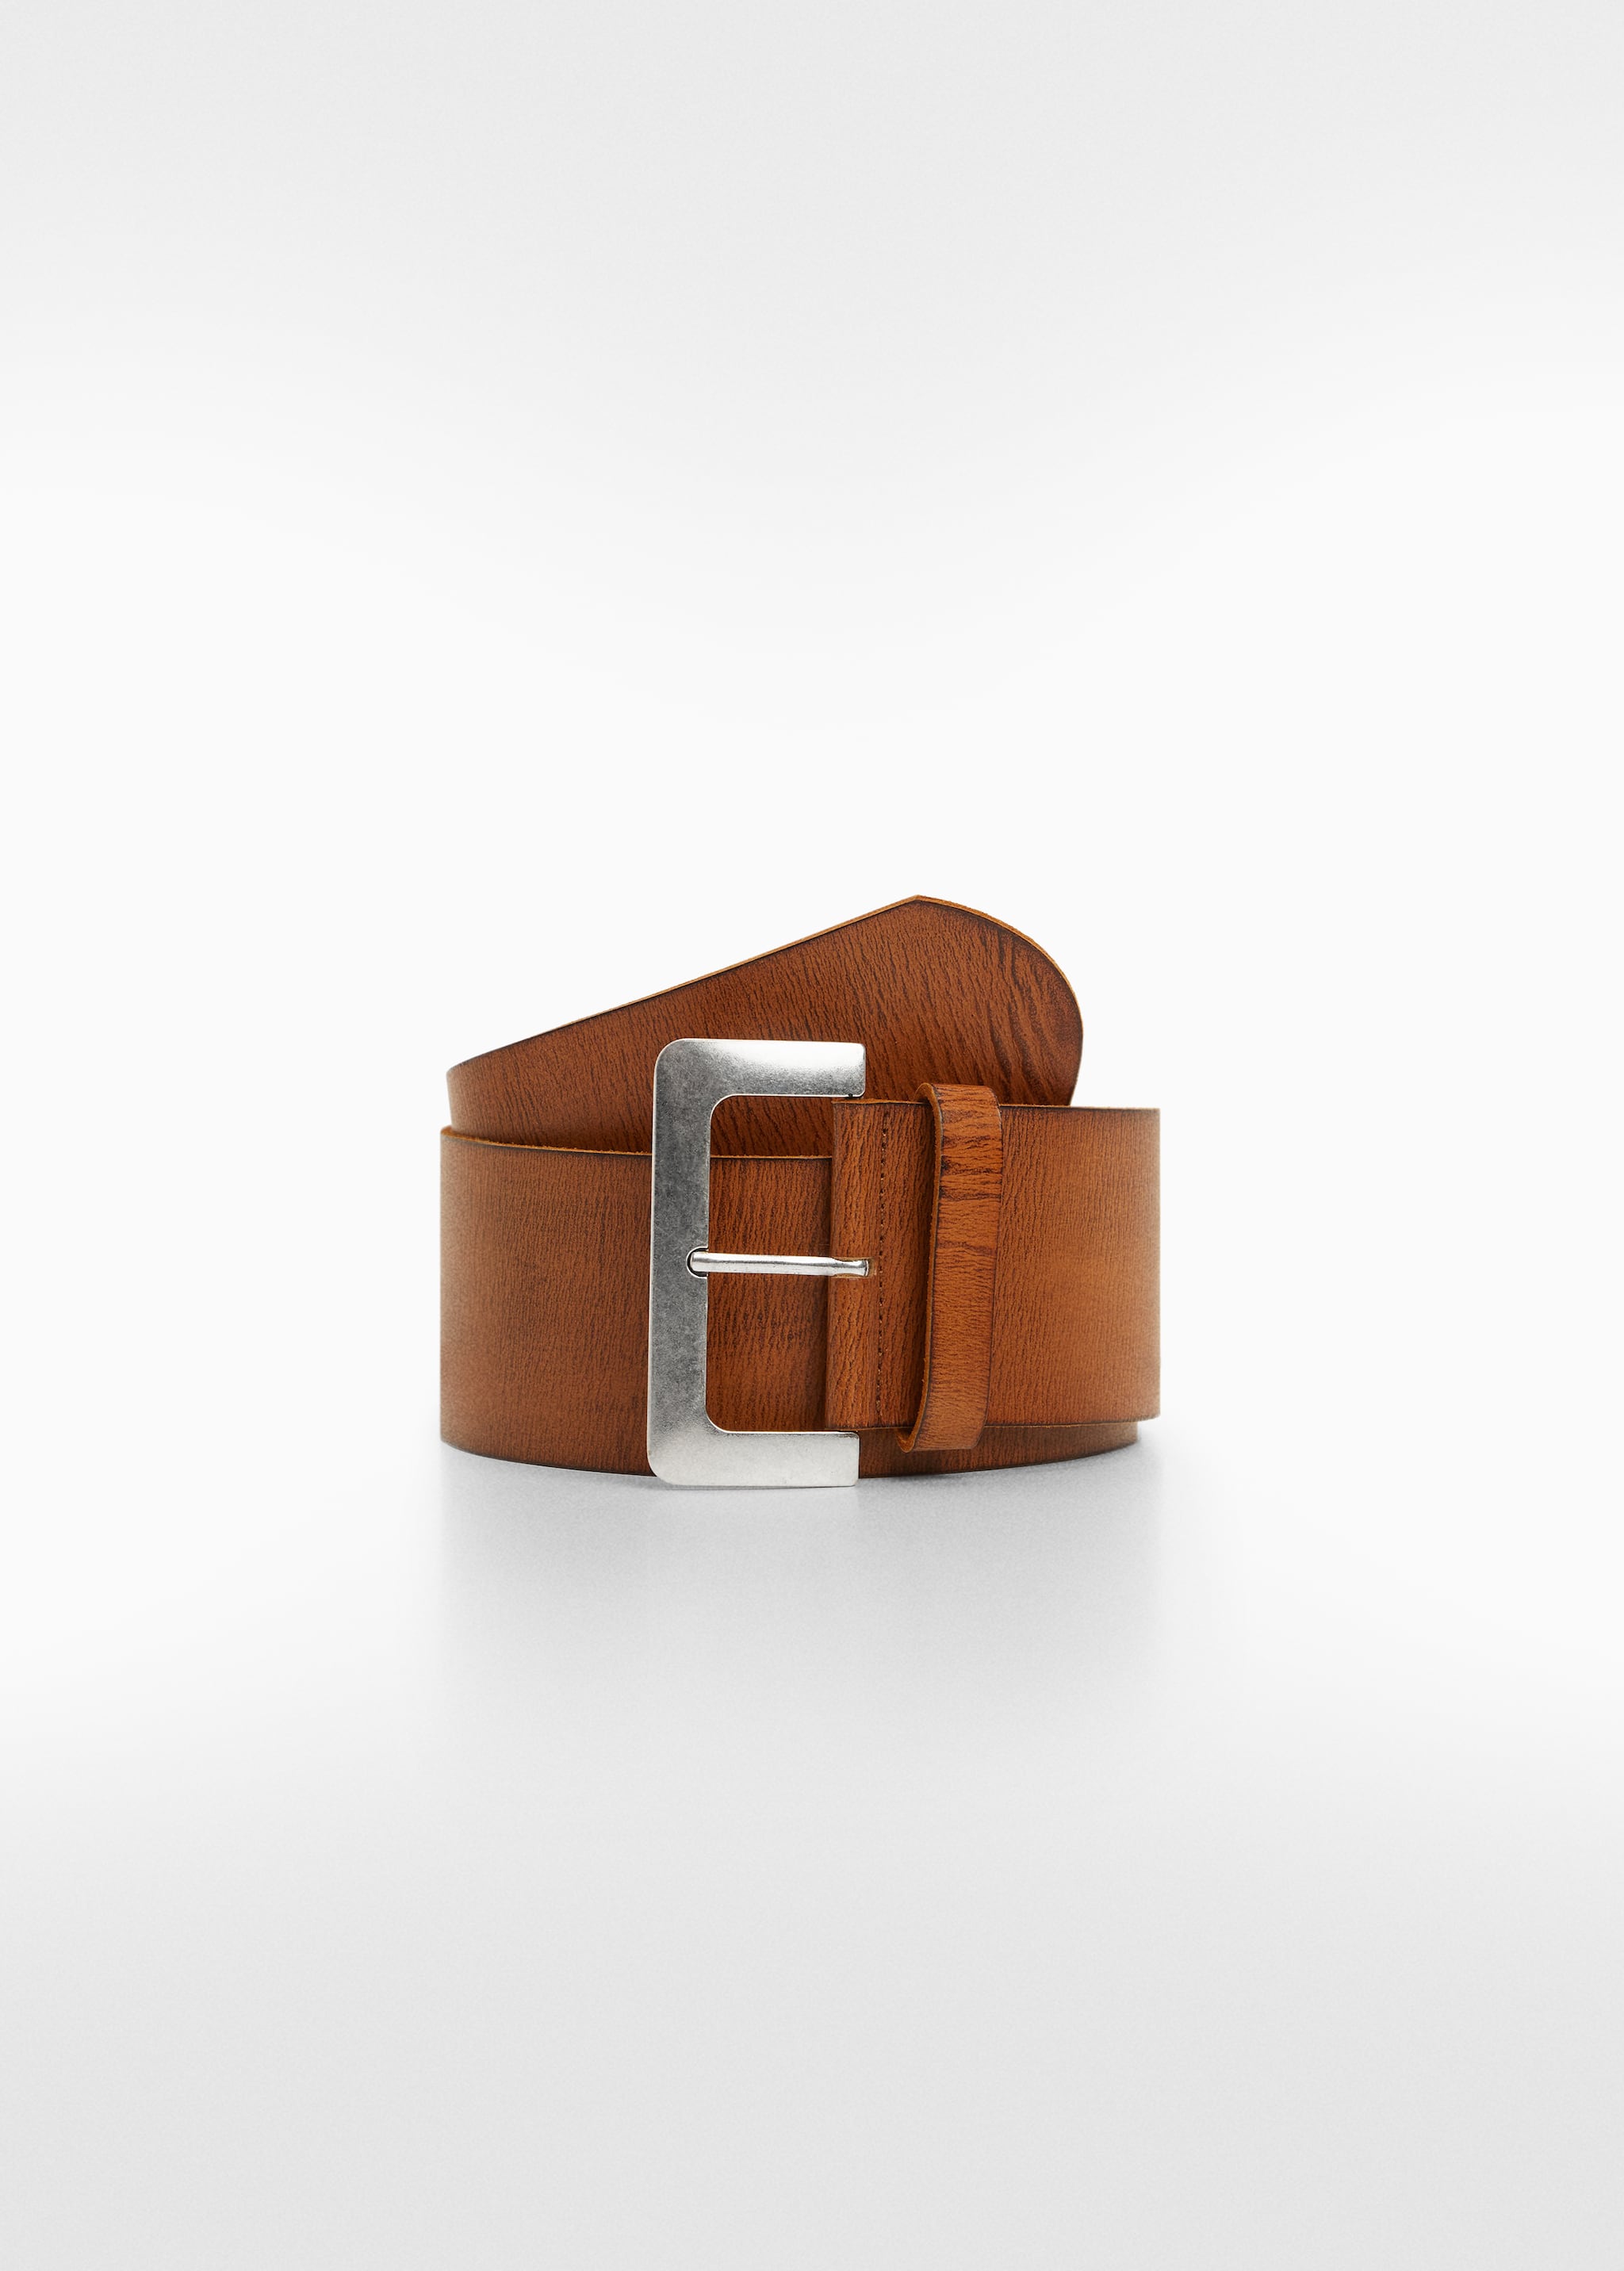 Wide leather belt - Article without model